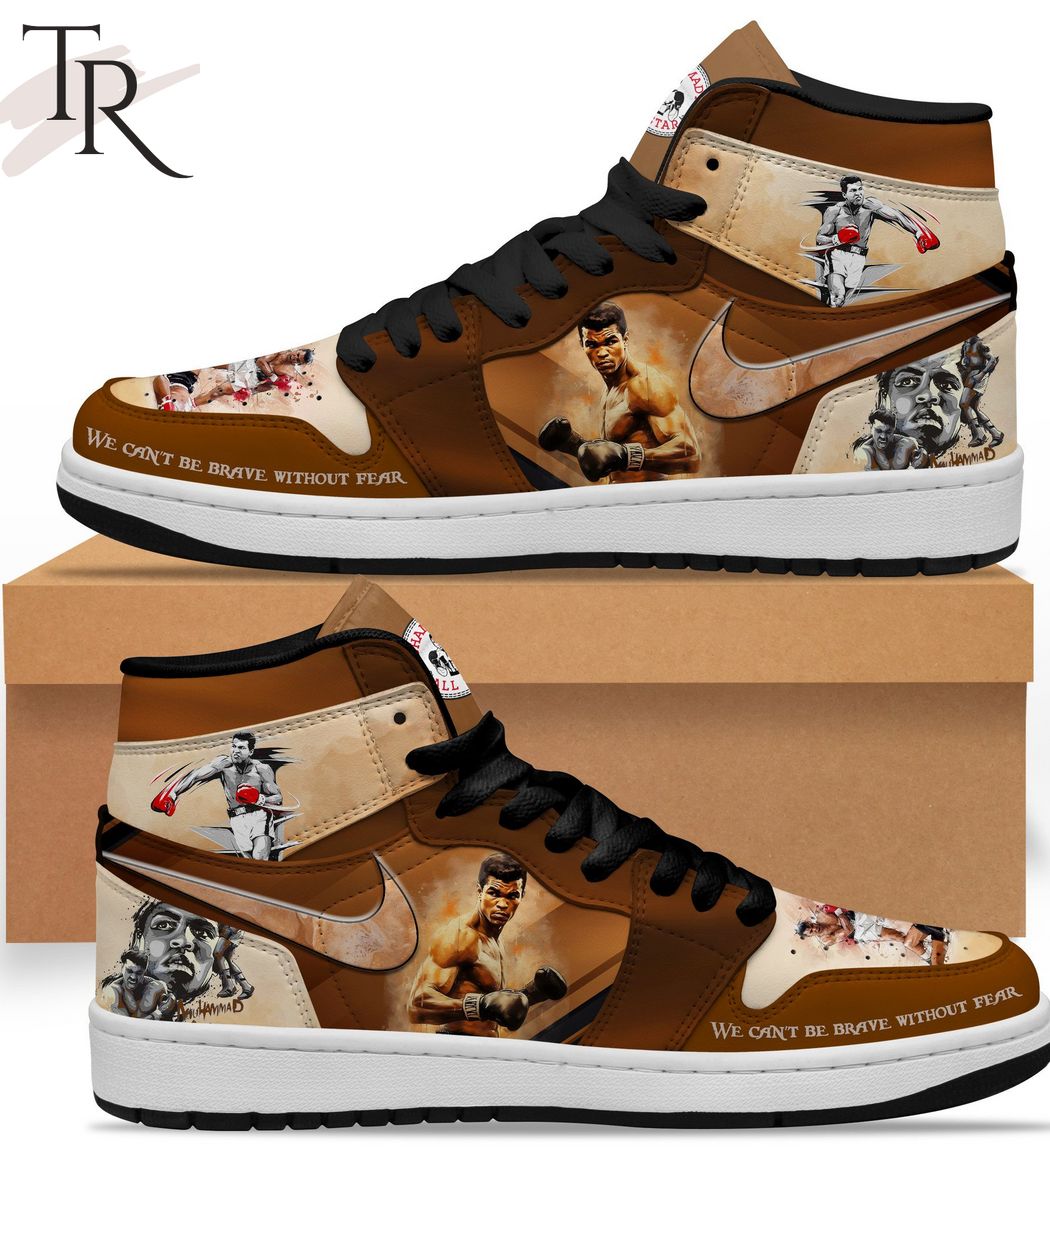 Muhammad Ali We Can't Be Brave Without Fear Air Jordan 1, Hightop